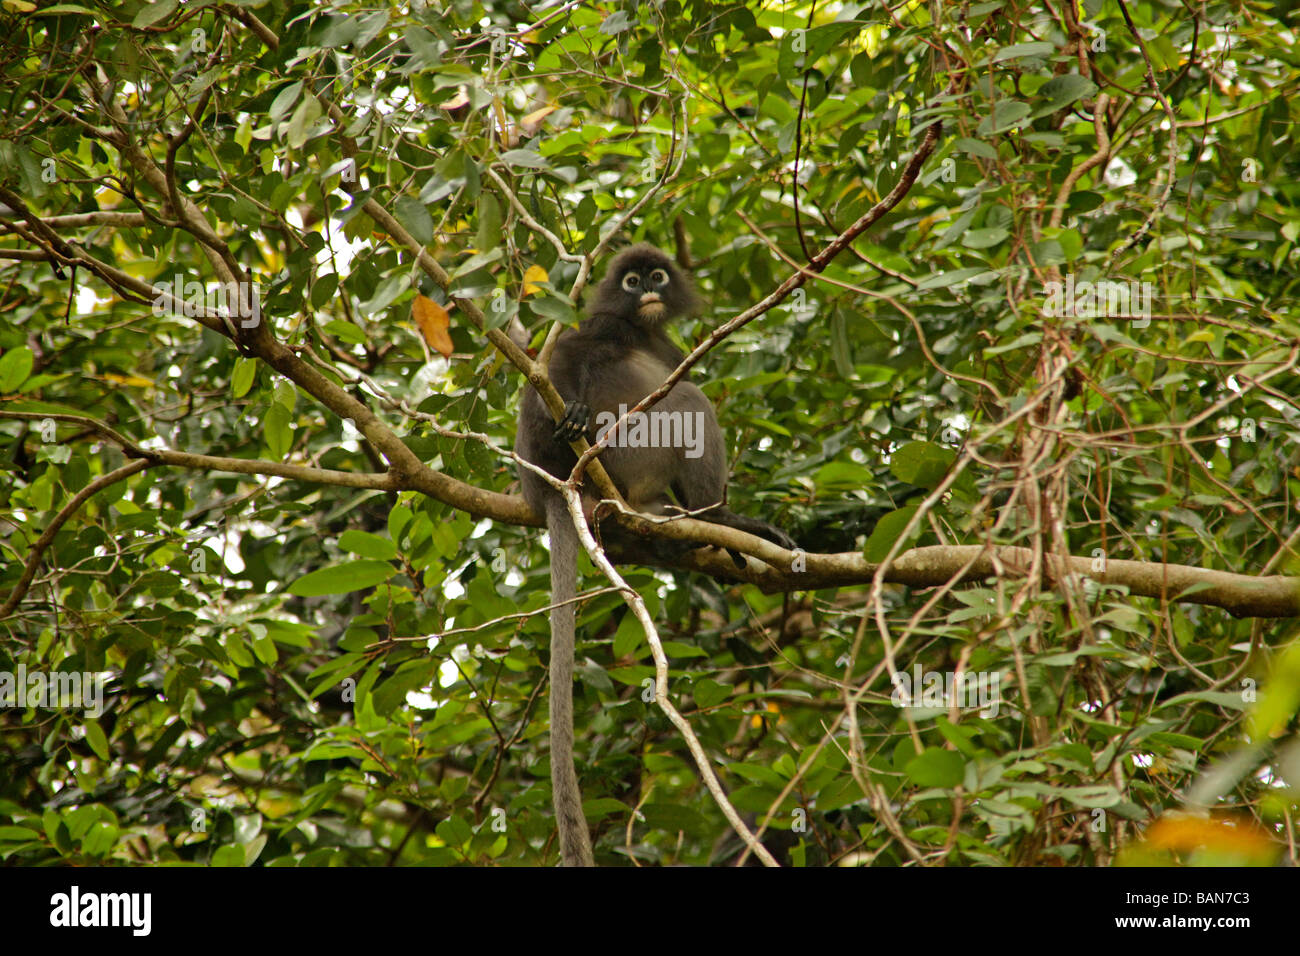 Dusky Leaf Monkey Trachypithecus obscurus on Perhentian Besar Island Terengganu Malaysia Stock Photo